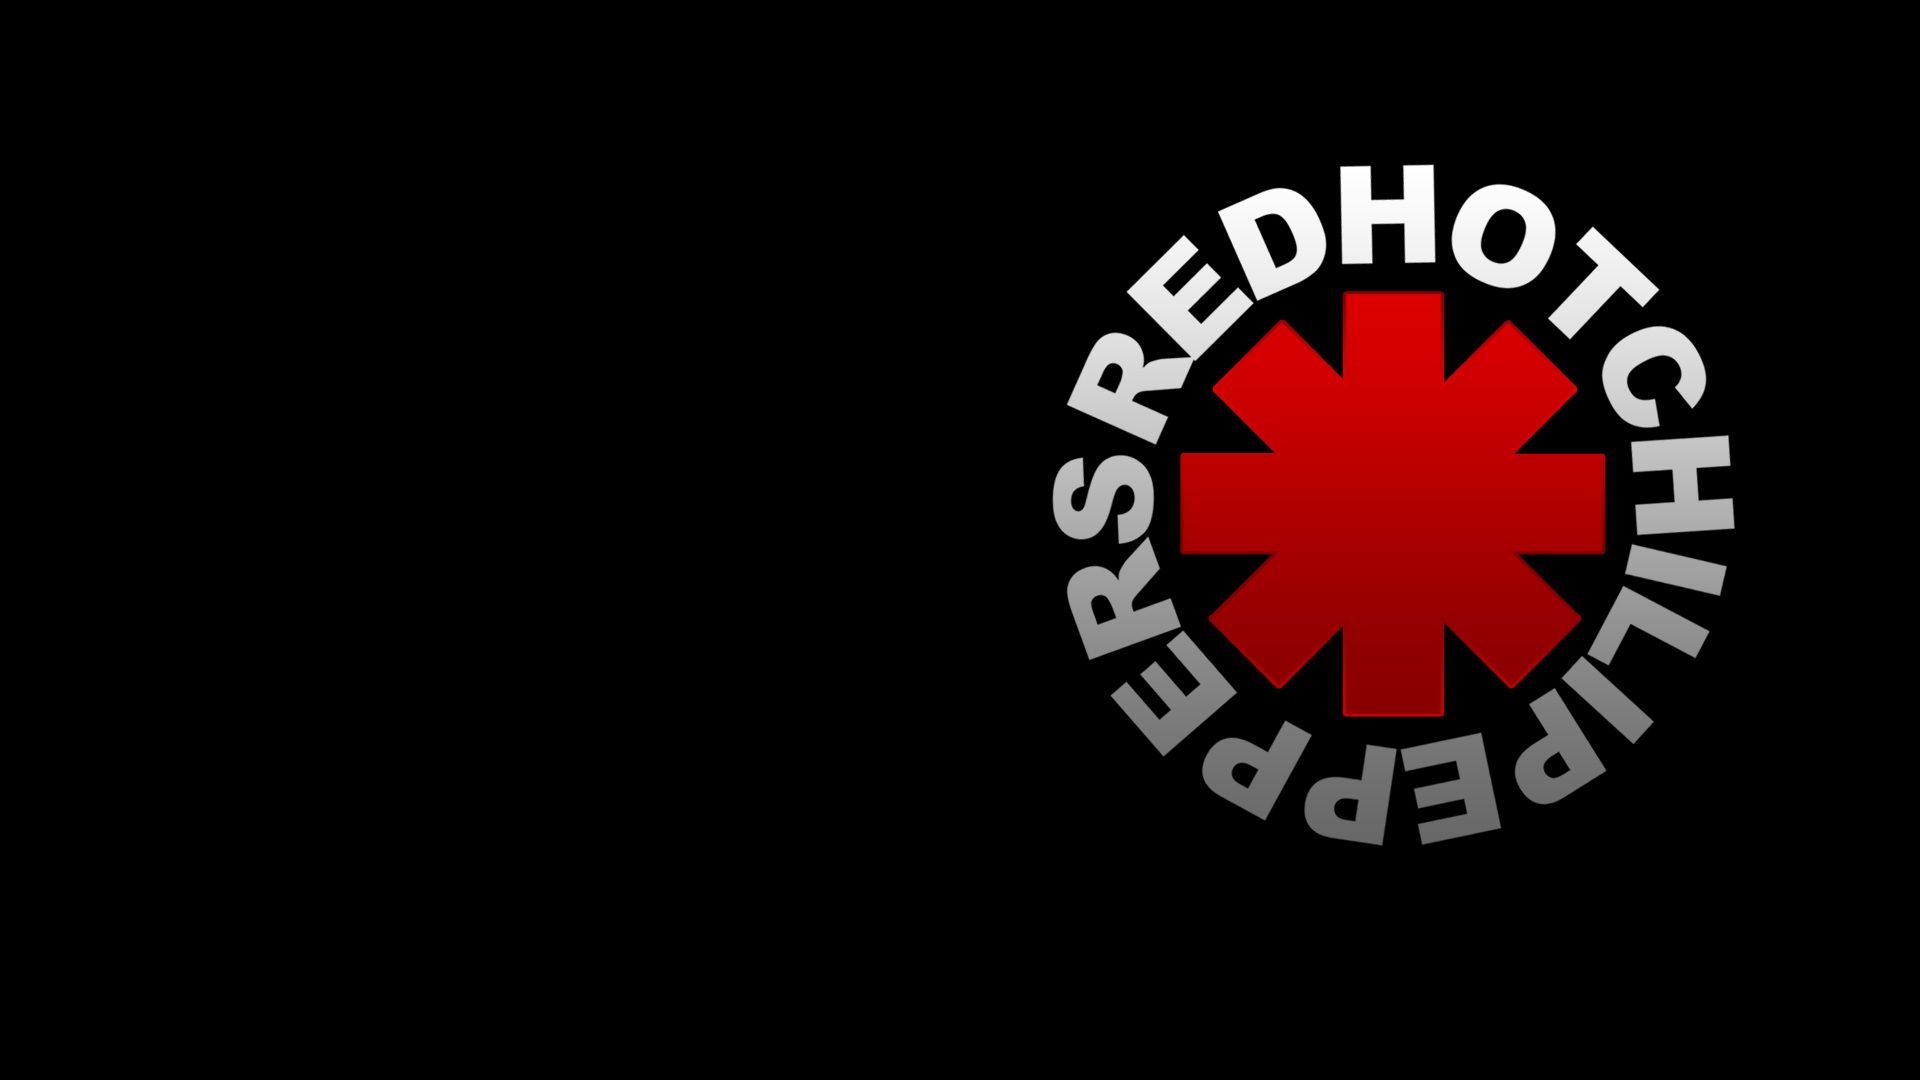 Red Hot Chili Peppers Desktop Wallpapers